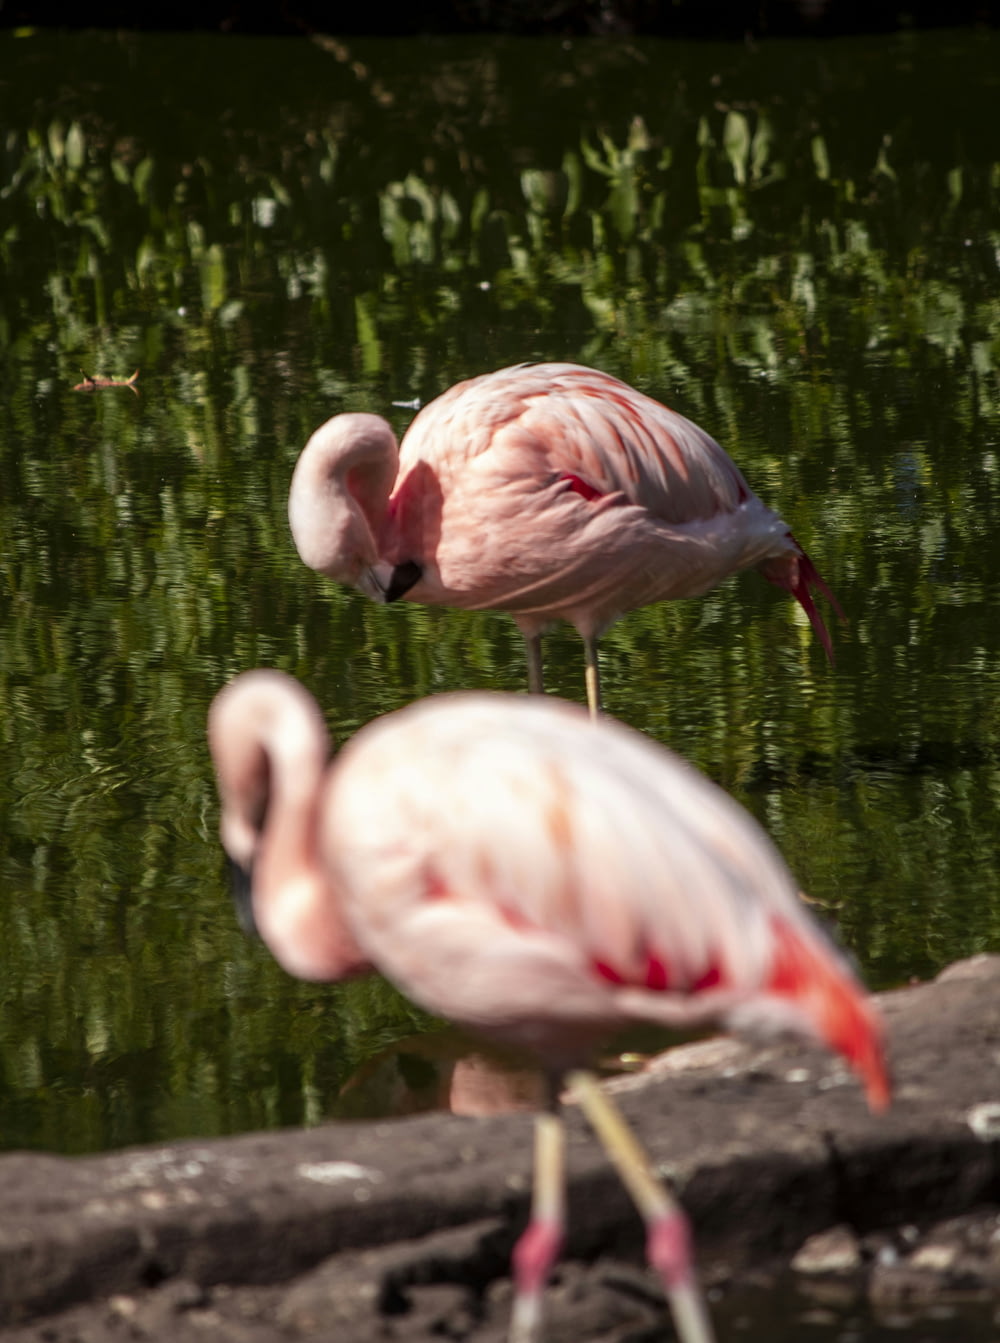 two flamingos standing next to each other near a body of water